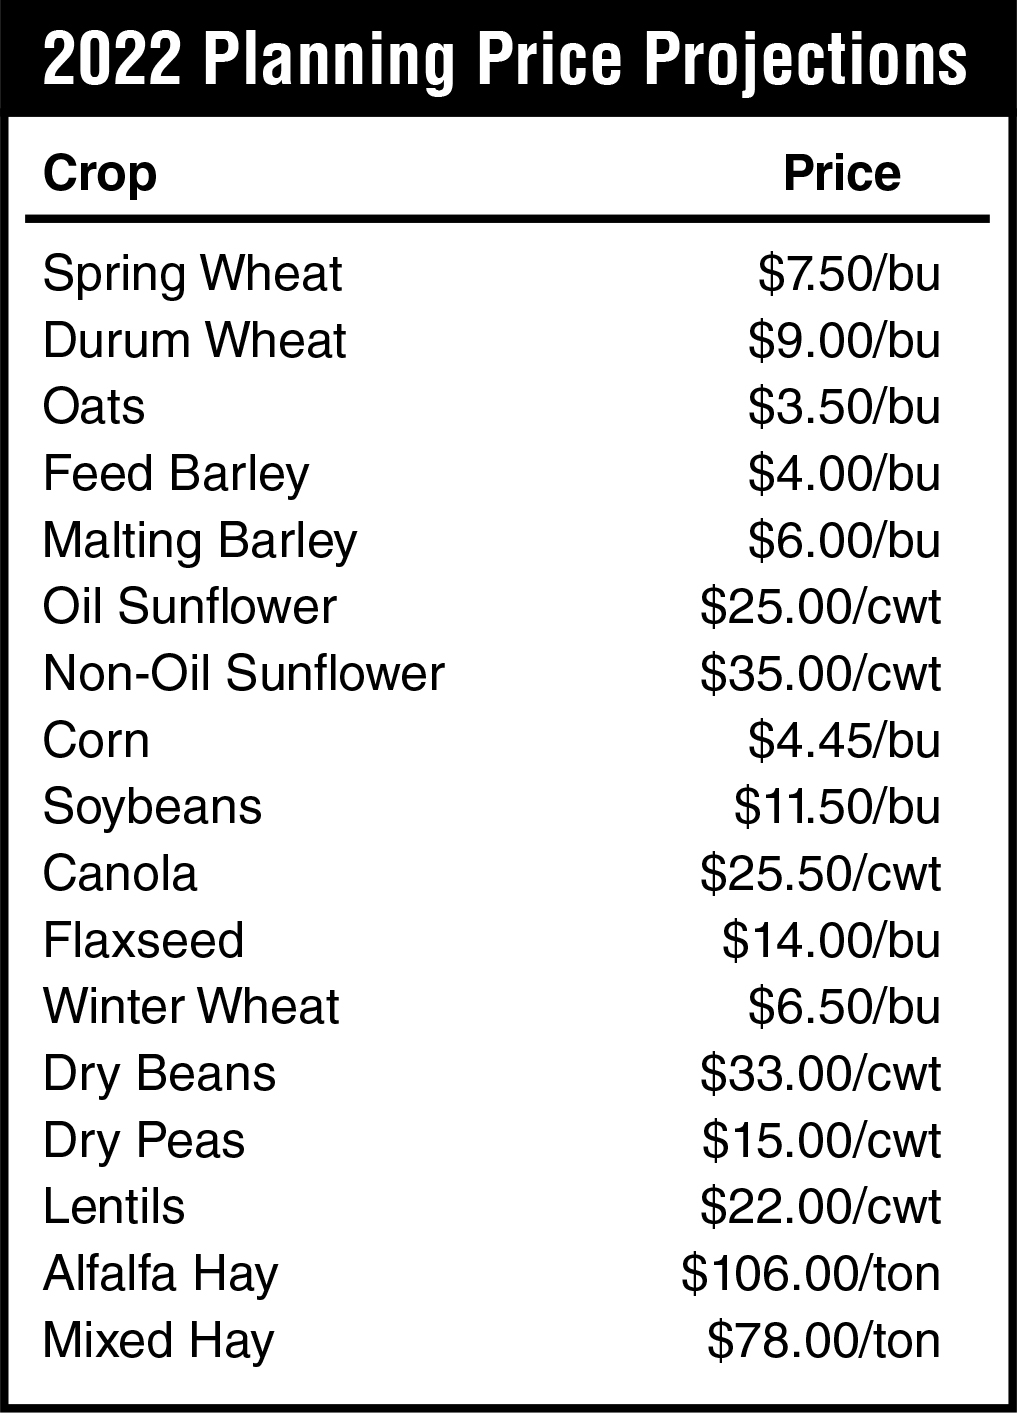 2022 Crop Planning Price Projections